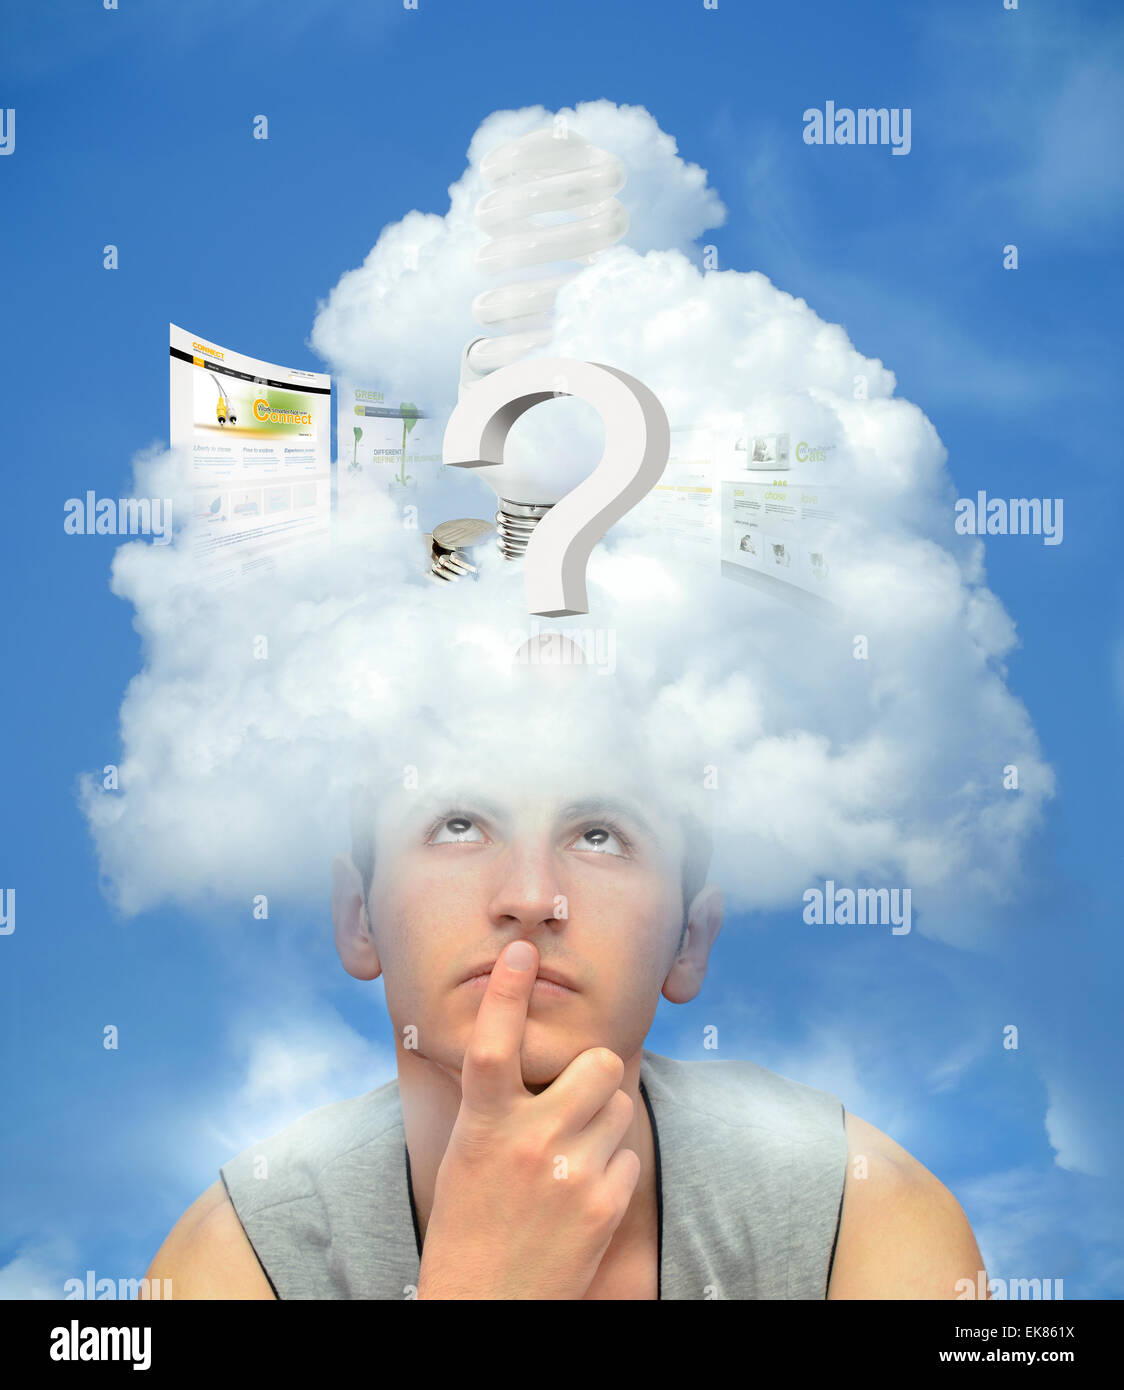 Head In The Technology Cloud Stock Photo - Download Image Now